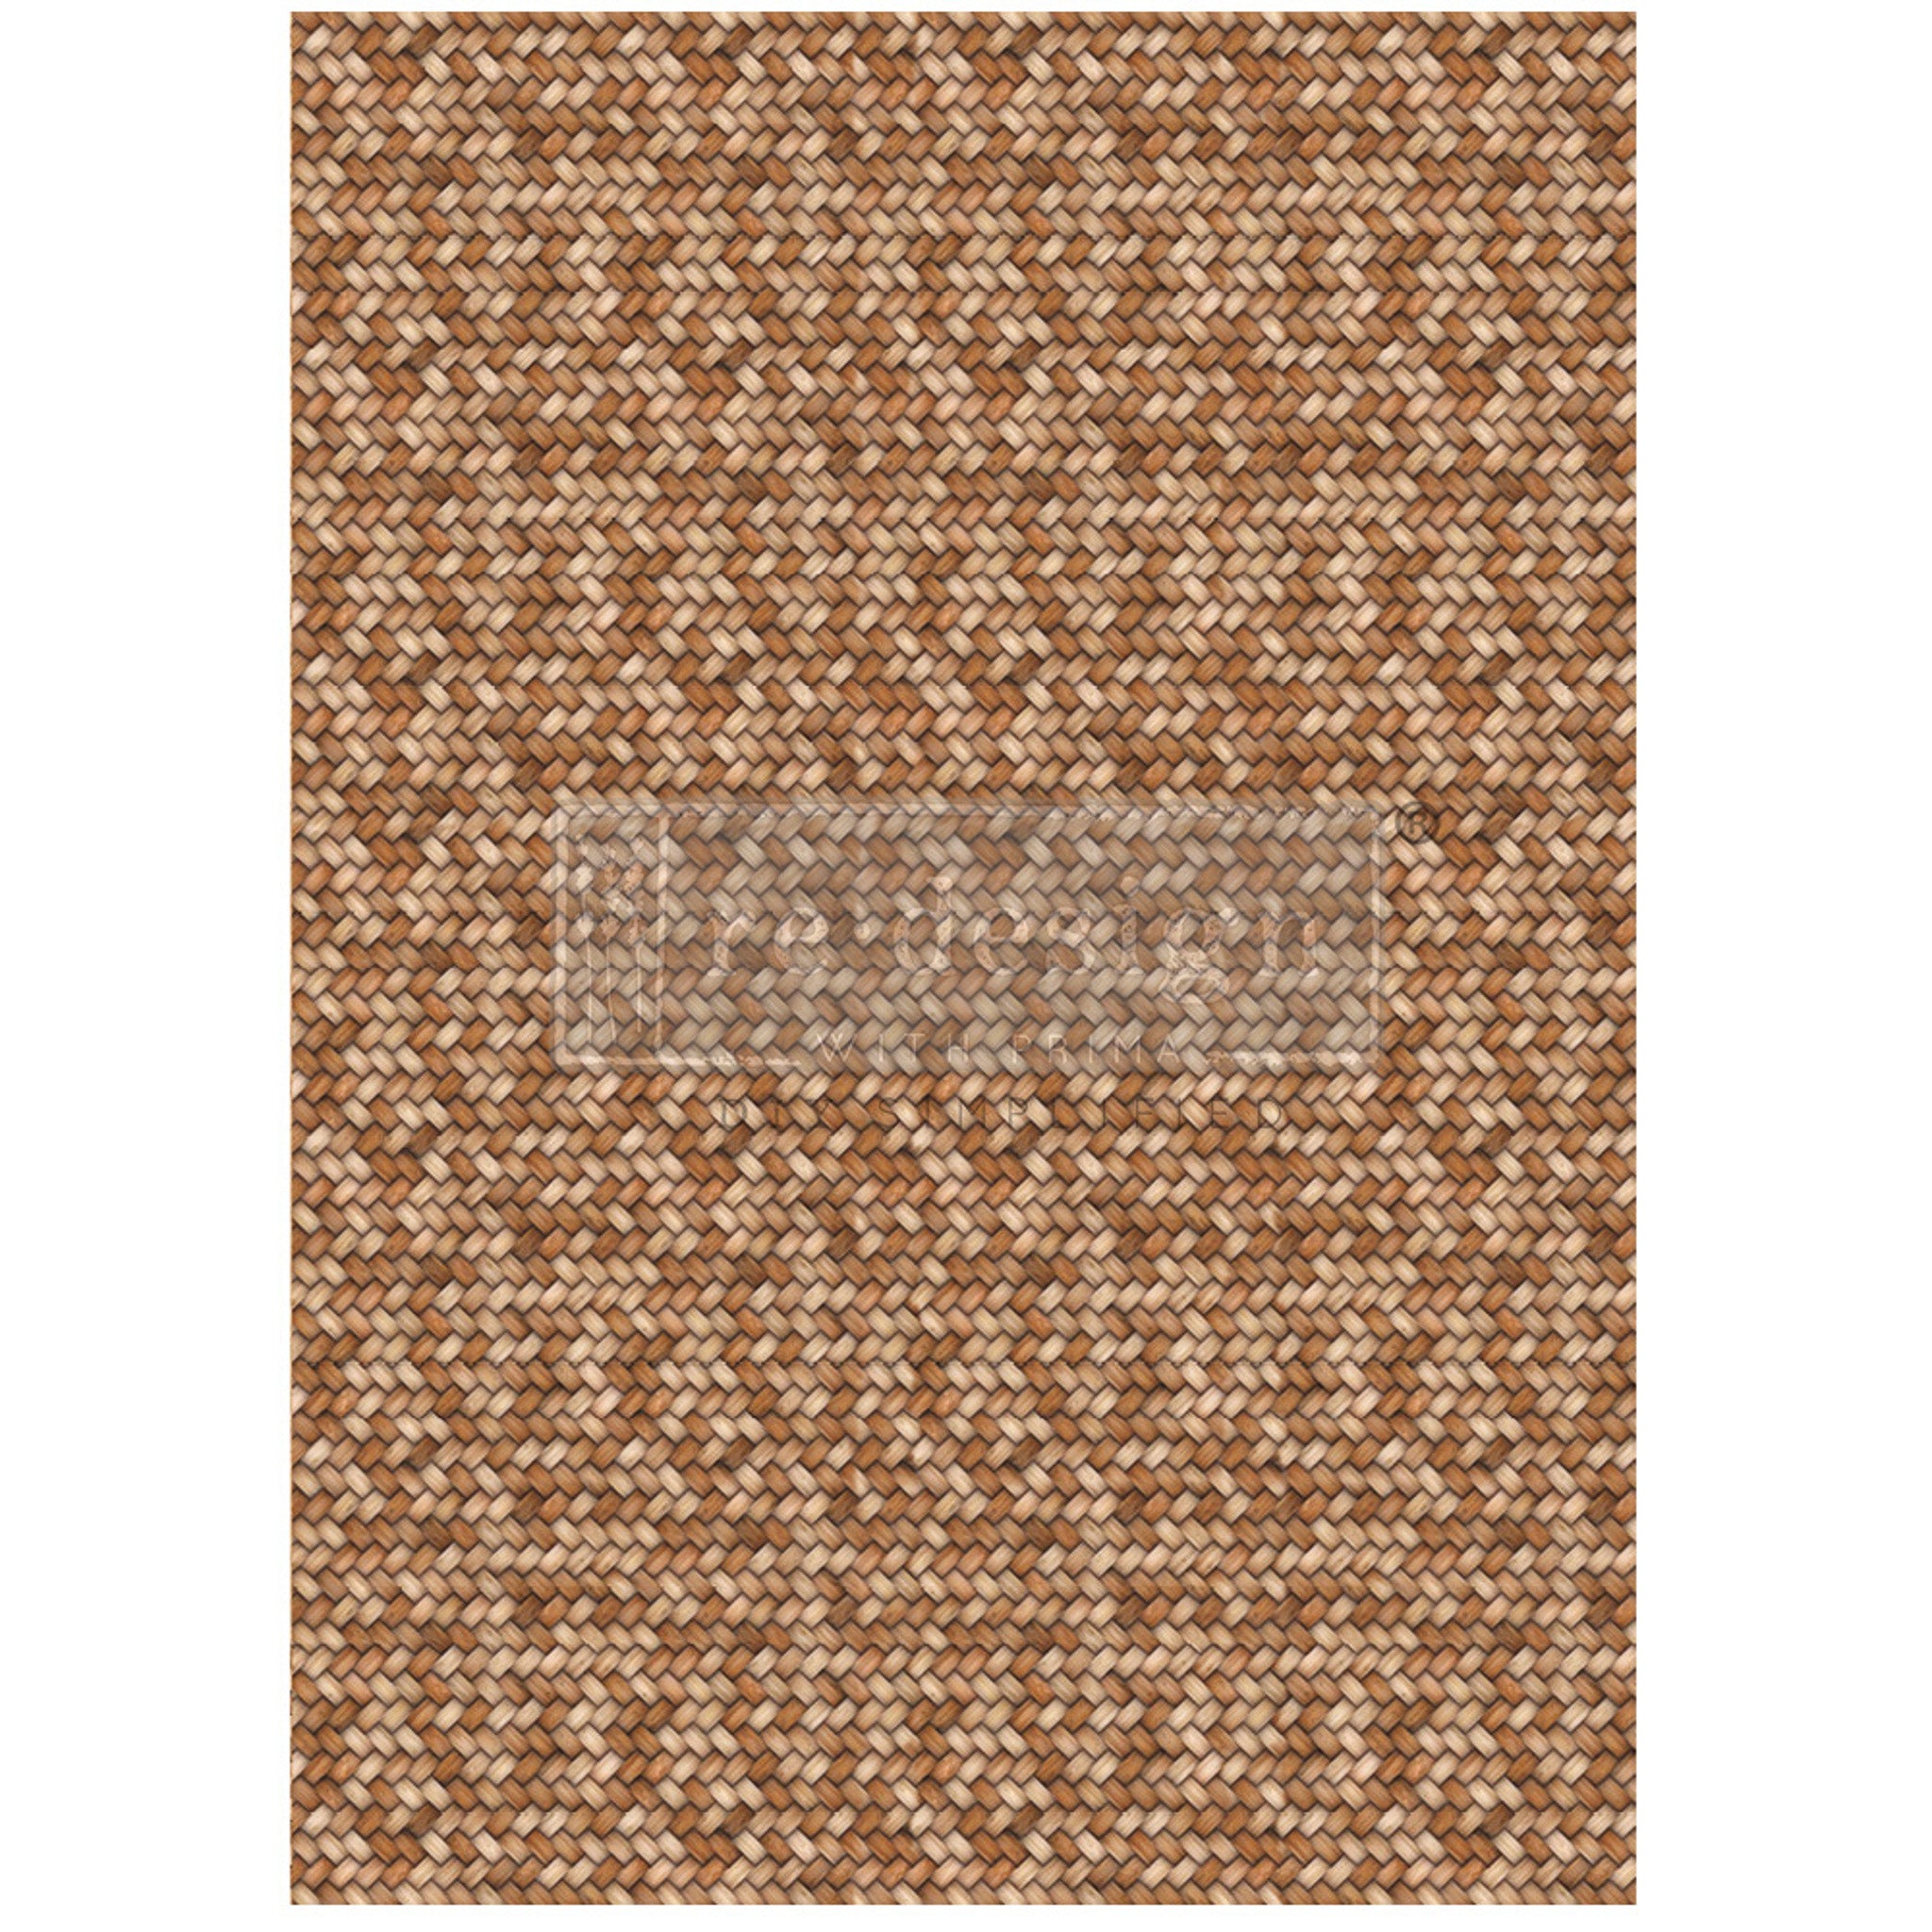 A1 fiber paper design that features a repeating braid pattern in subtle, neutral brown shades. White borders are on the sides.